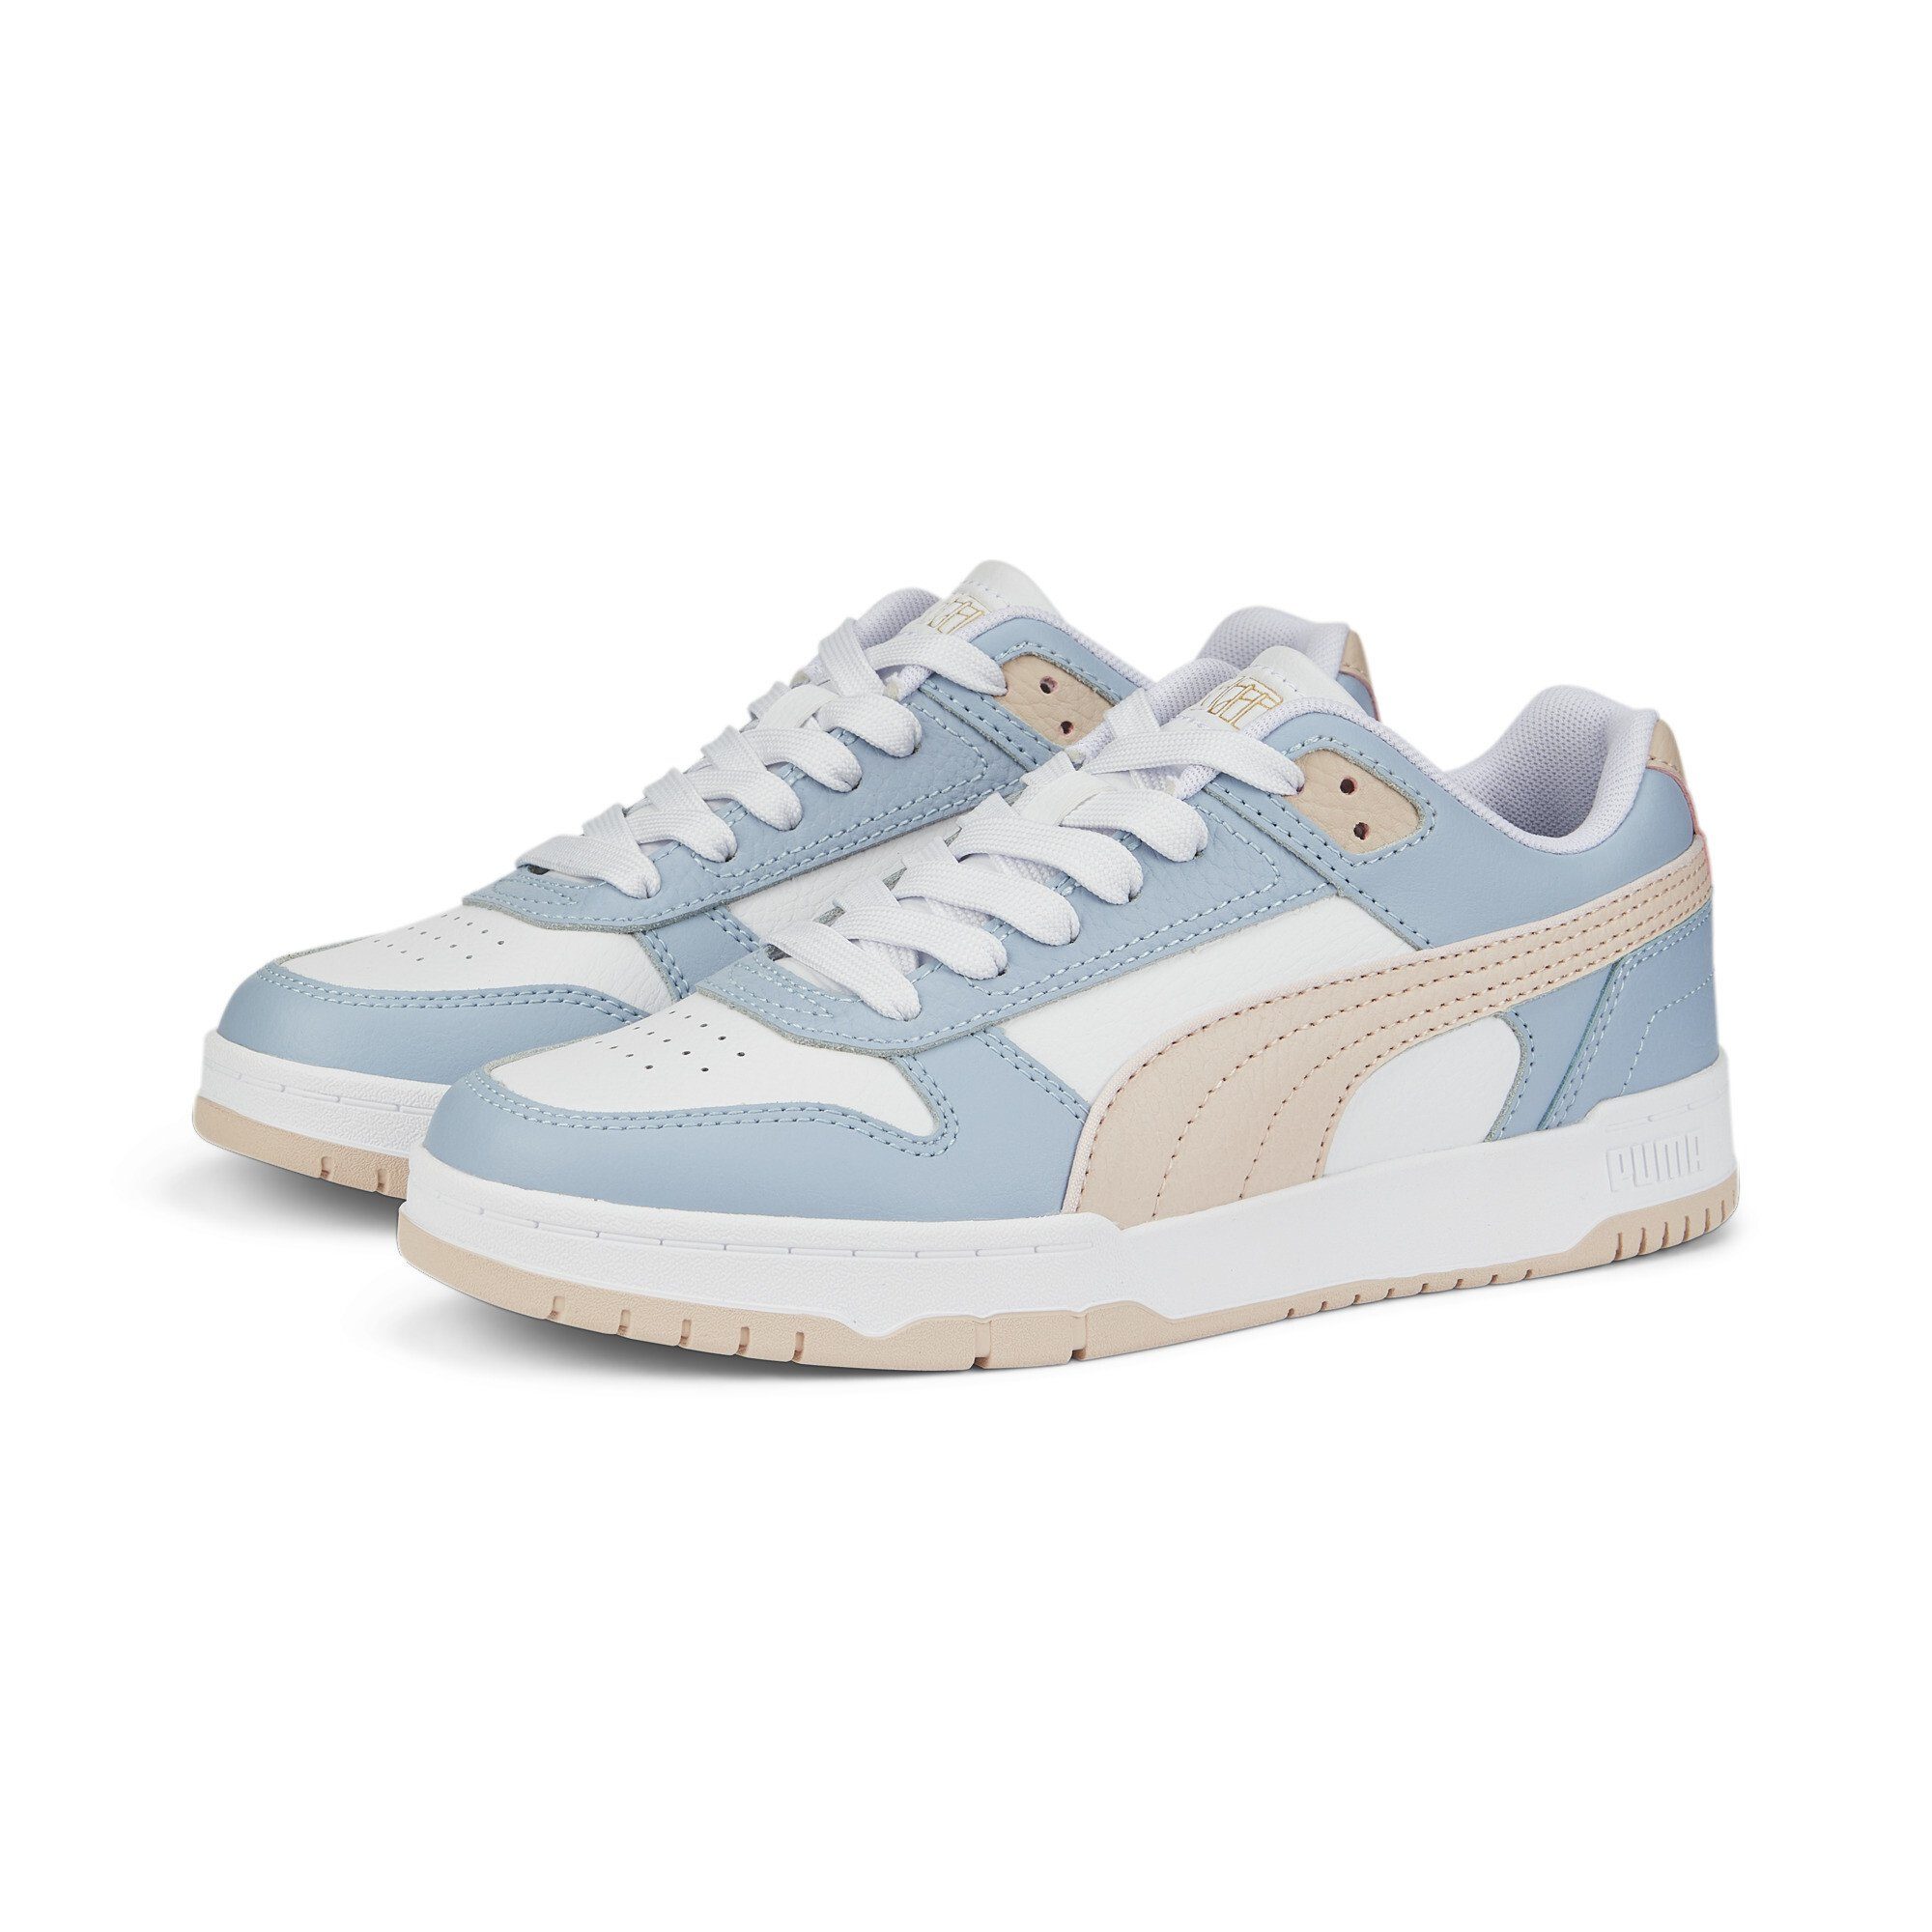 PUMA »RBD Game Low Sneakers« Sneaker online kaufen | OTTO